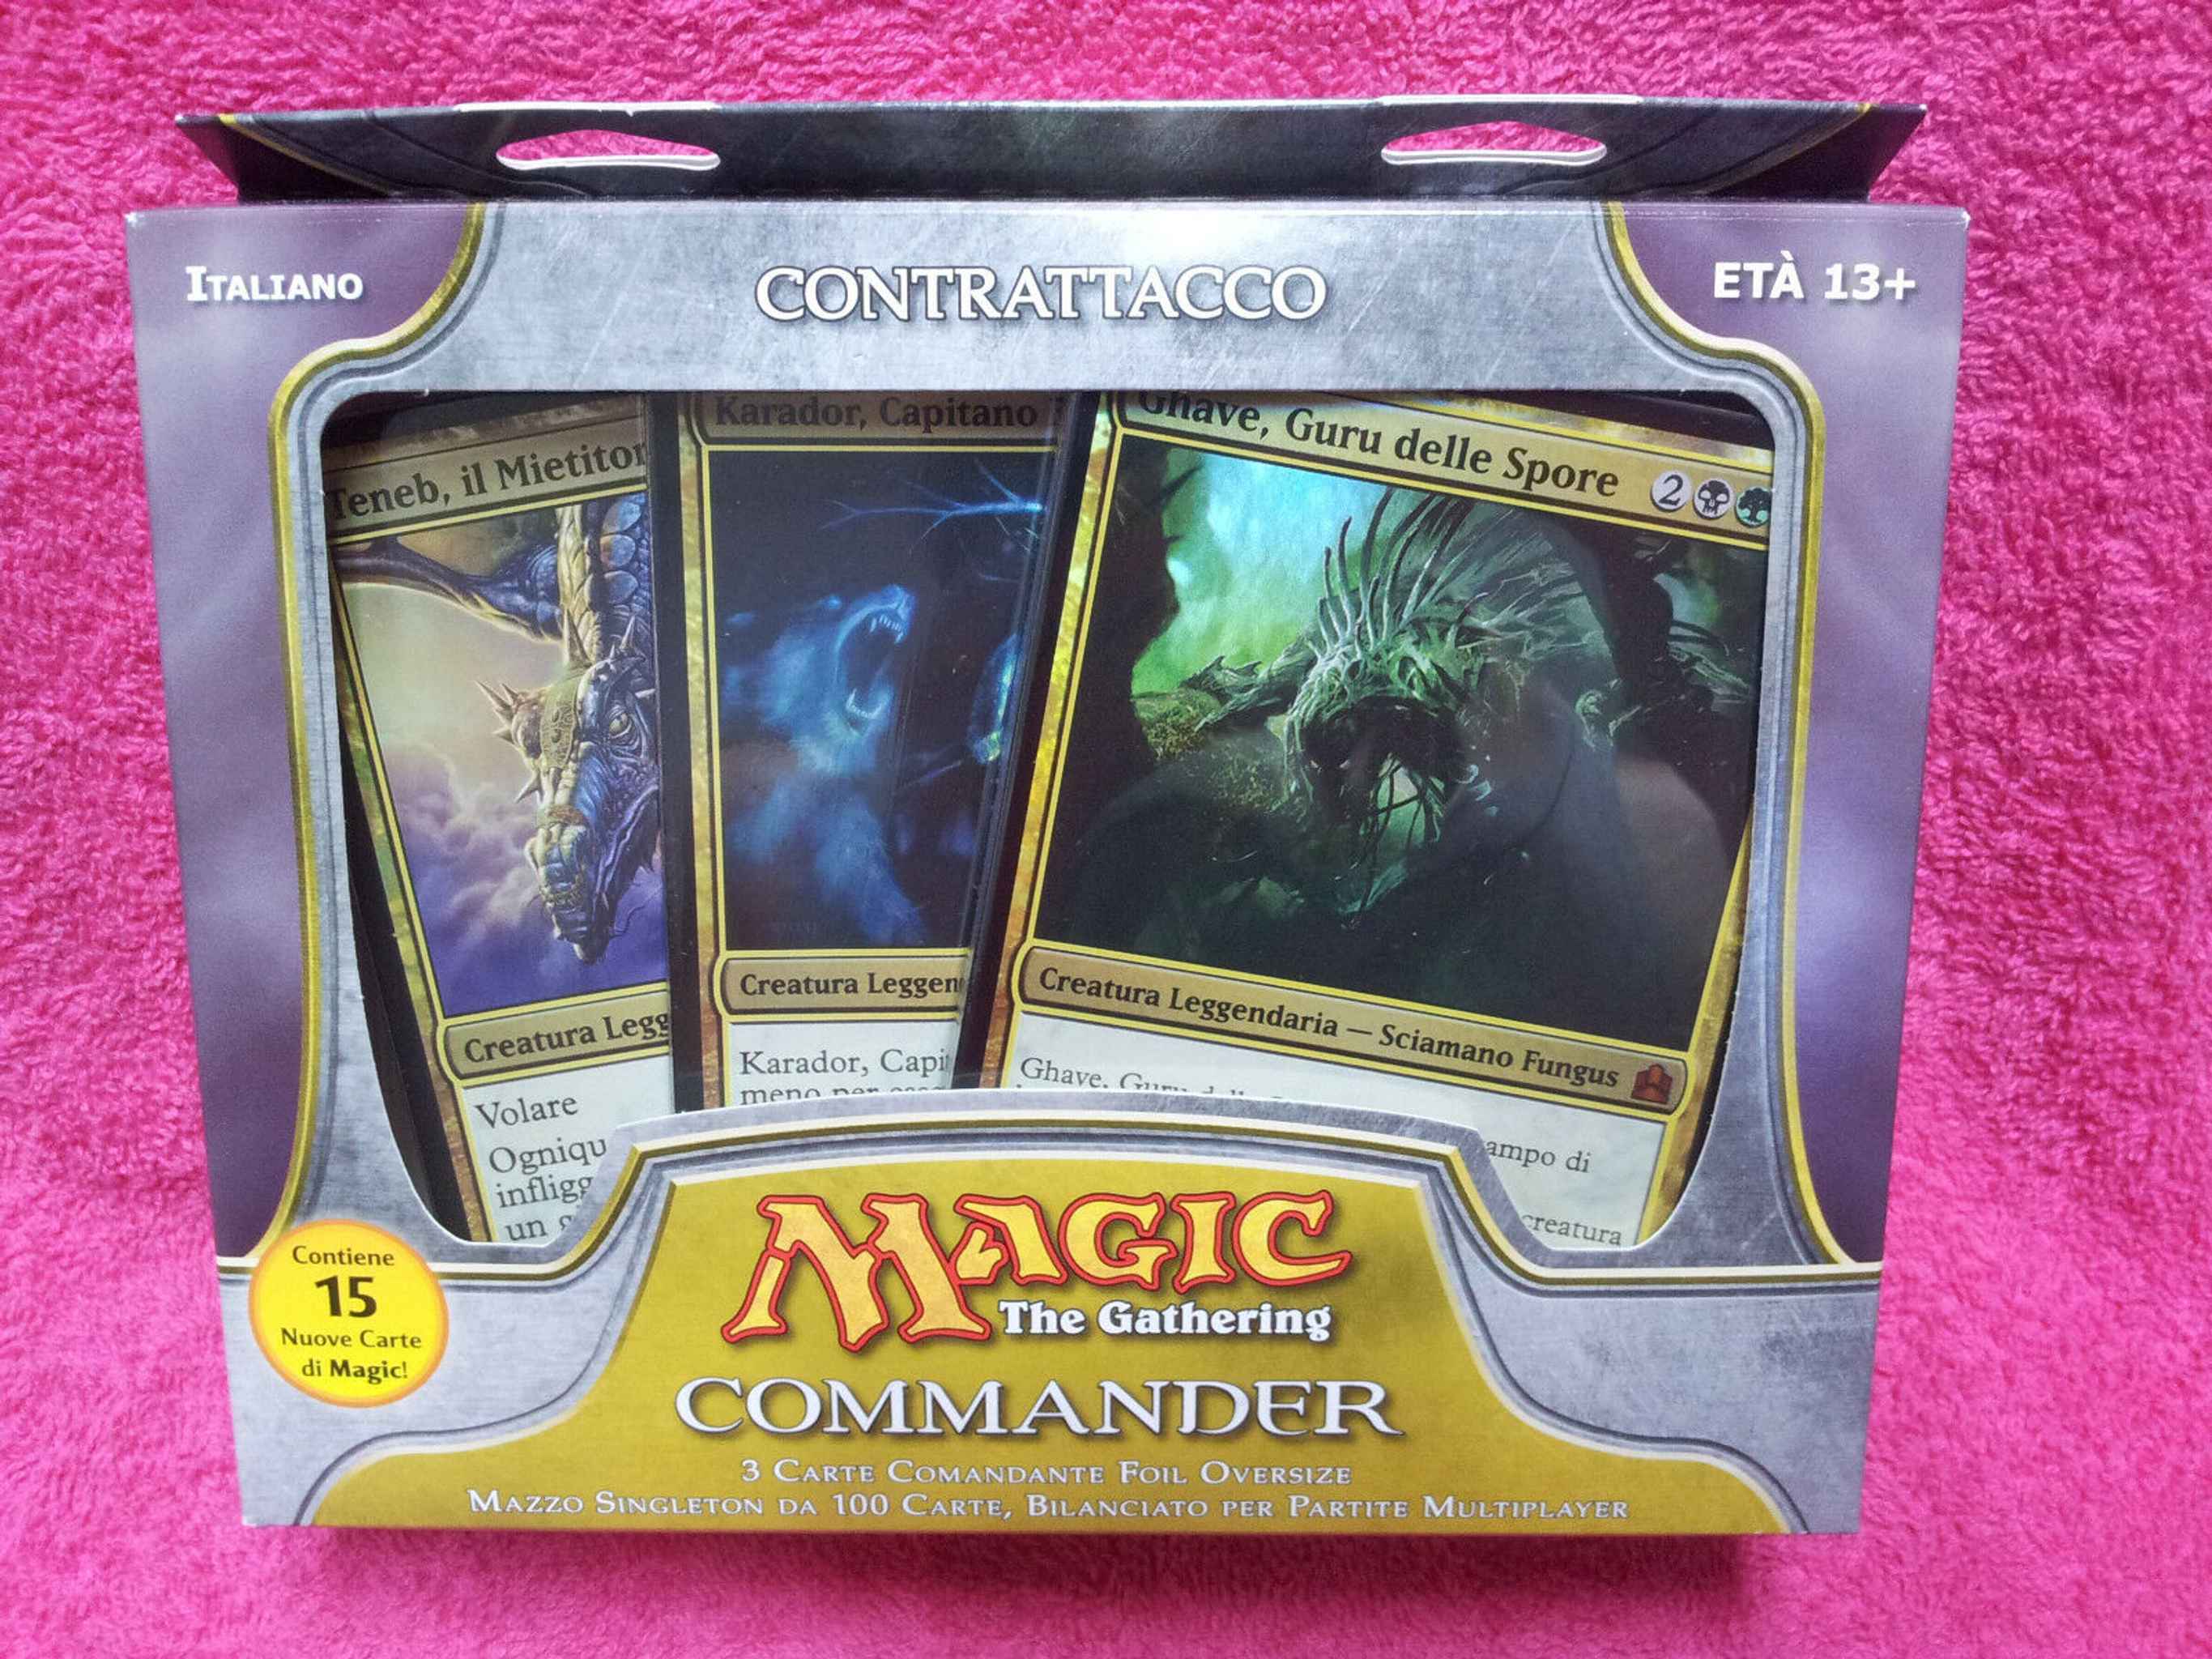 Magic The Gathering 2011 Commander Deck Counterpunch for sale online 